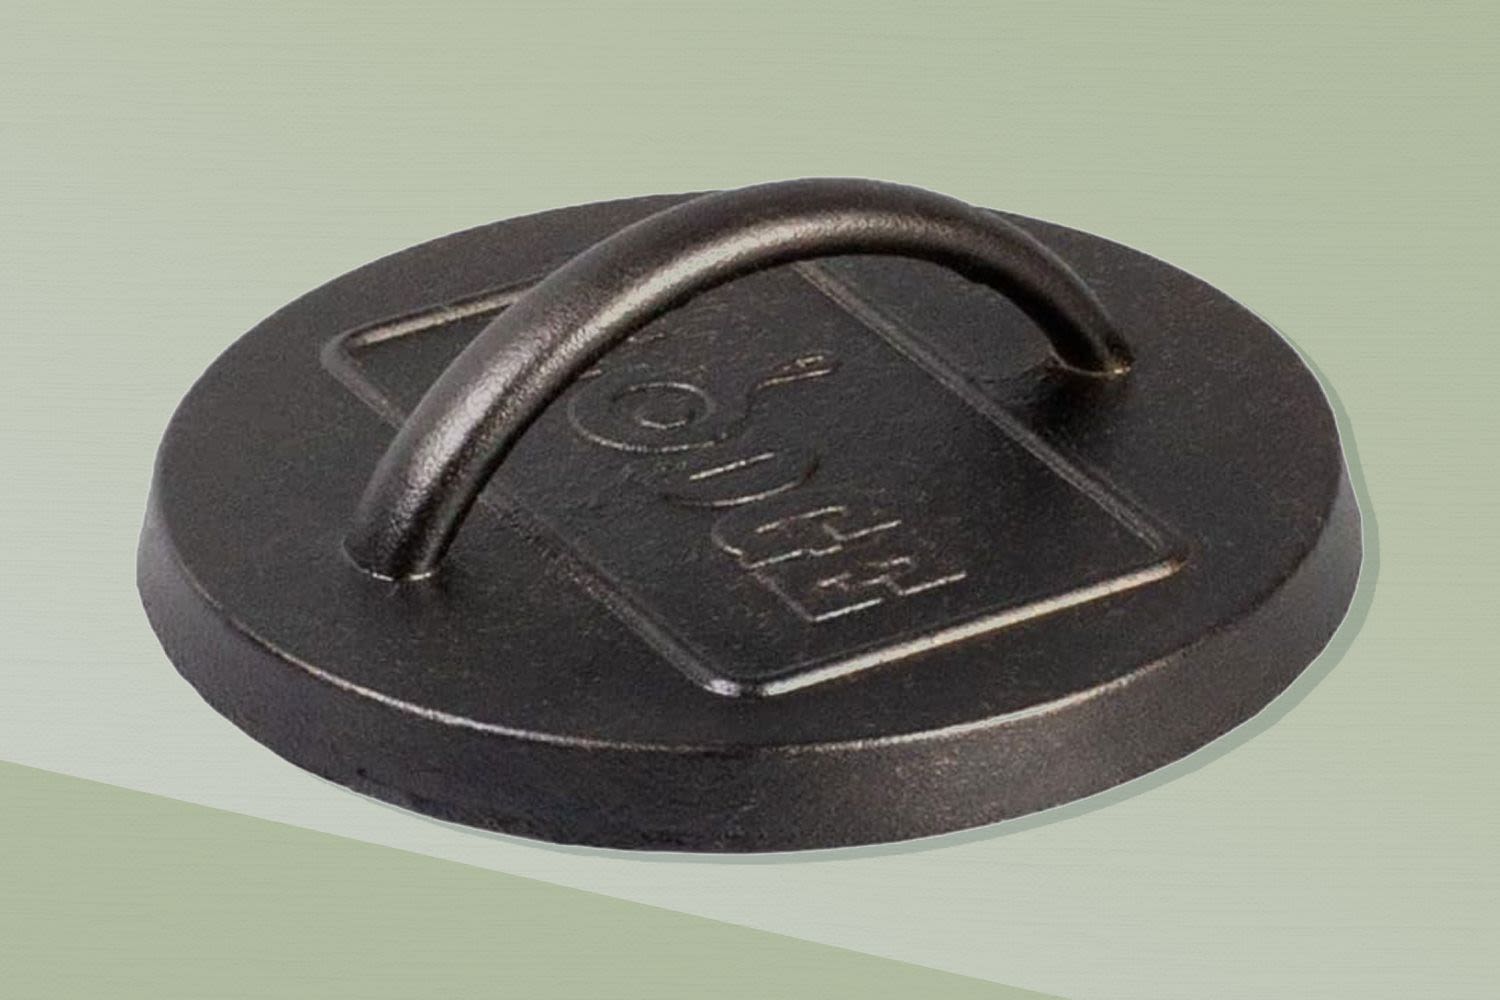 All You Need to Make the Smash Burgers of Your Dreams Is This $15 Lodge Cast Iron Burger Press